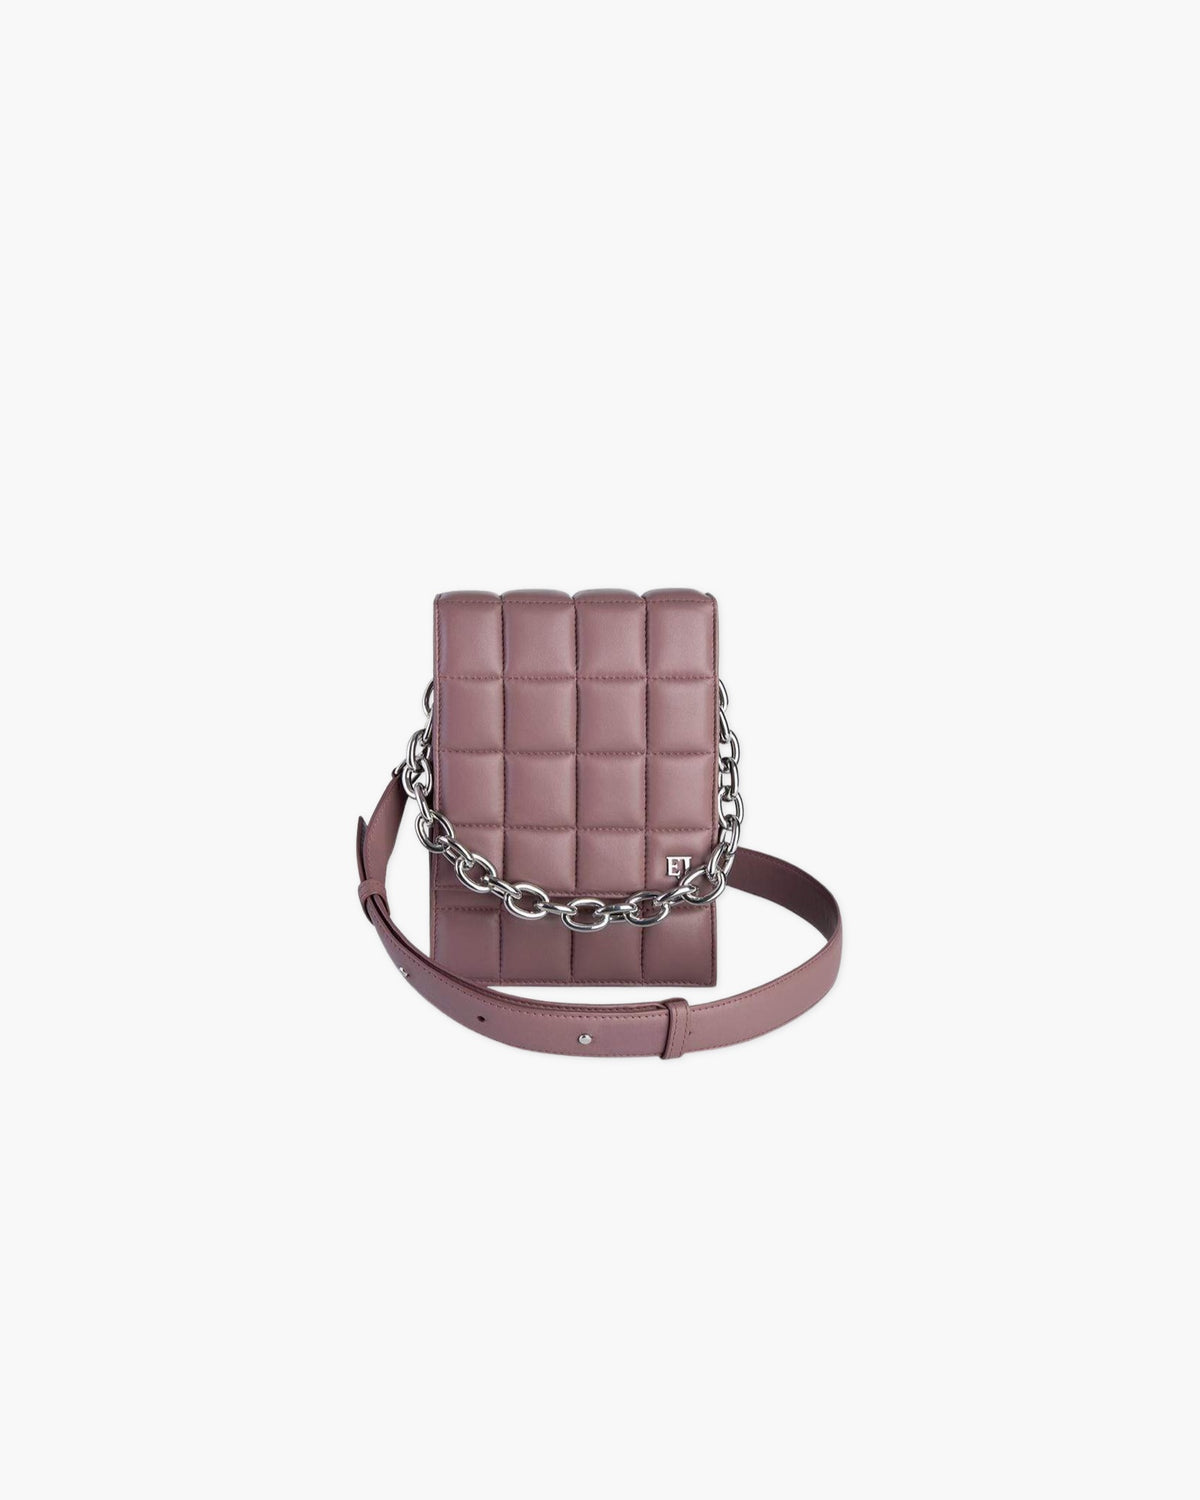 Luxury Leather Crossbody Bags for Women, Eric Javits Collection